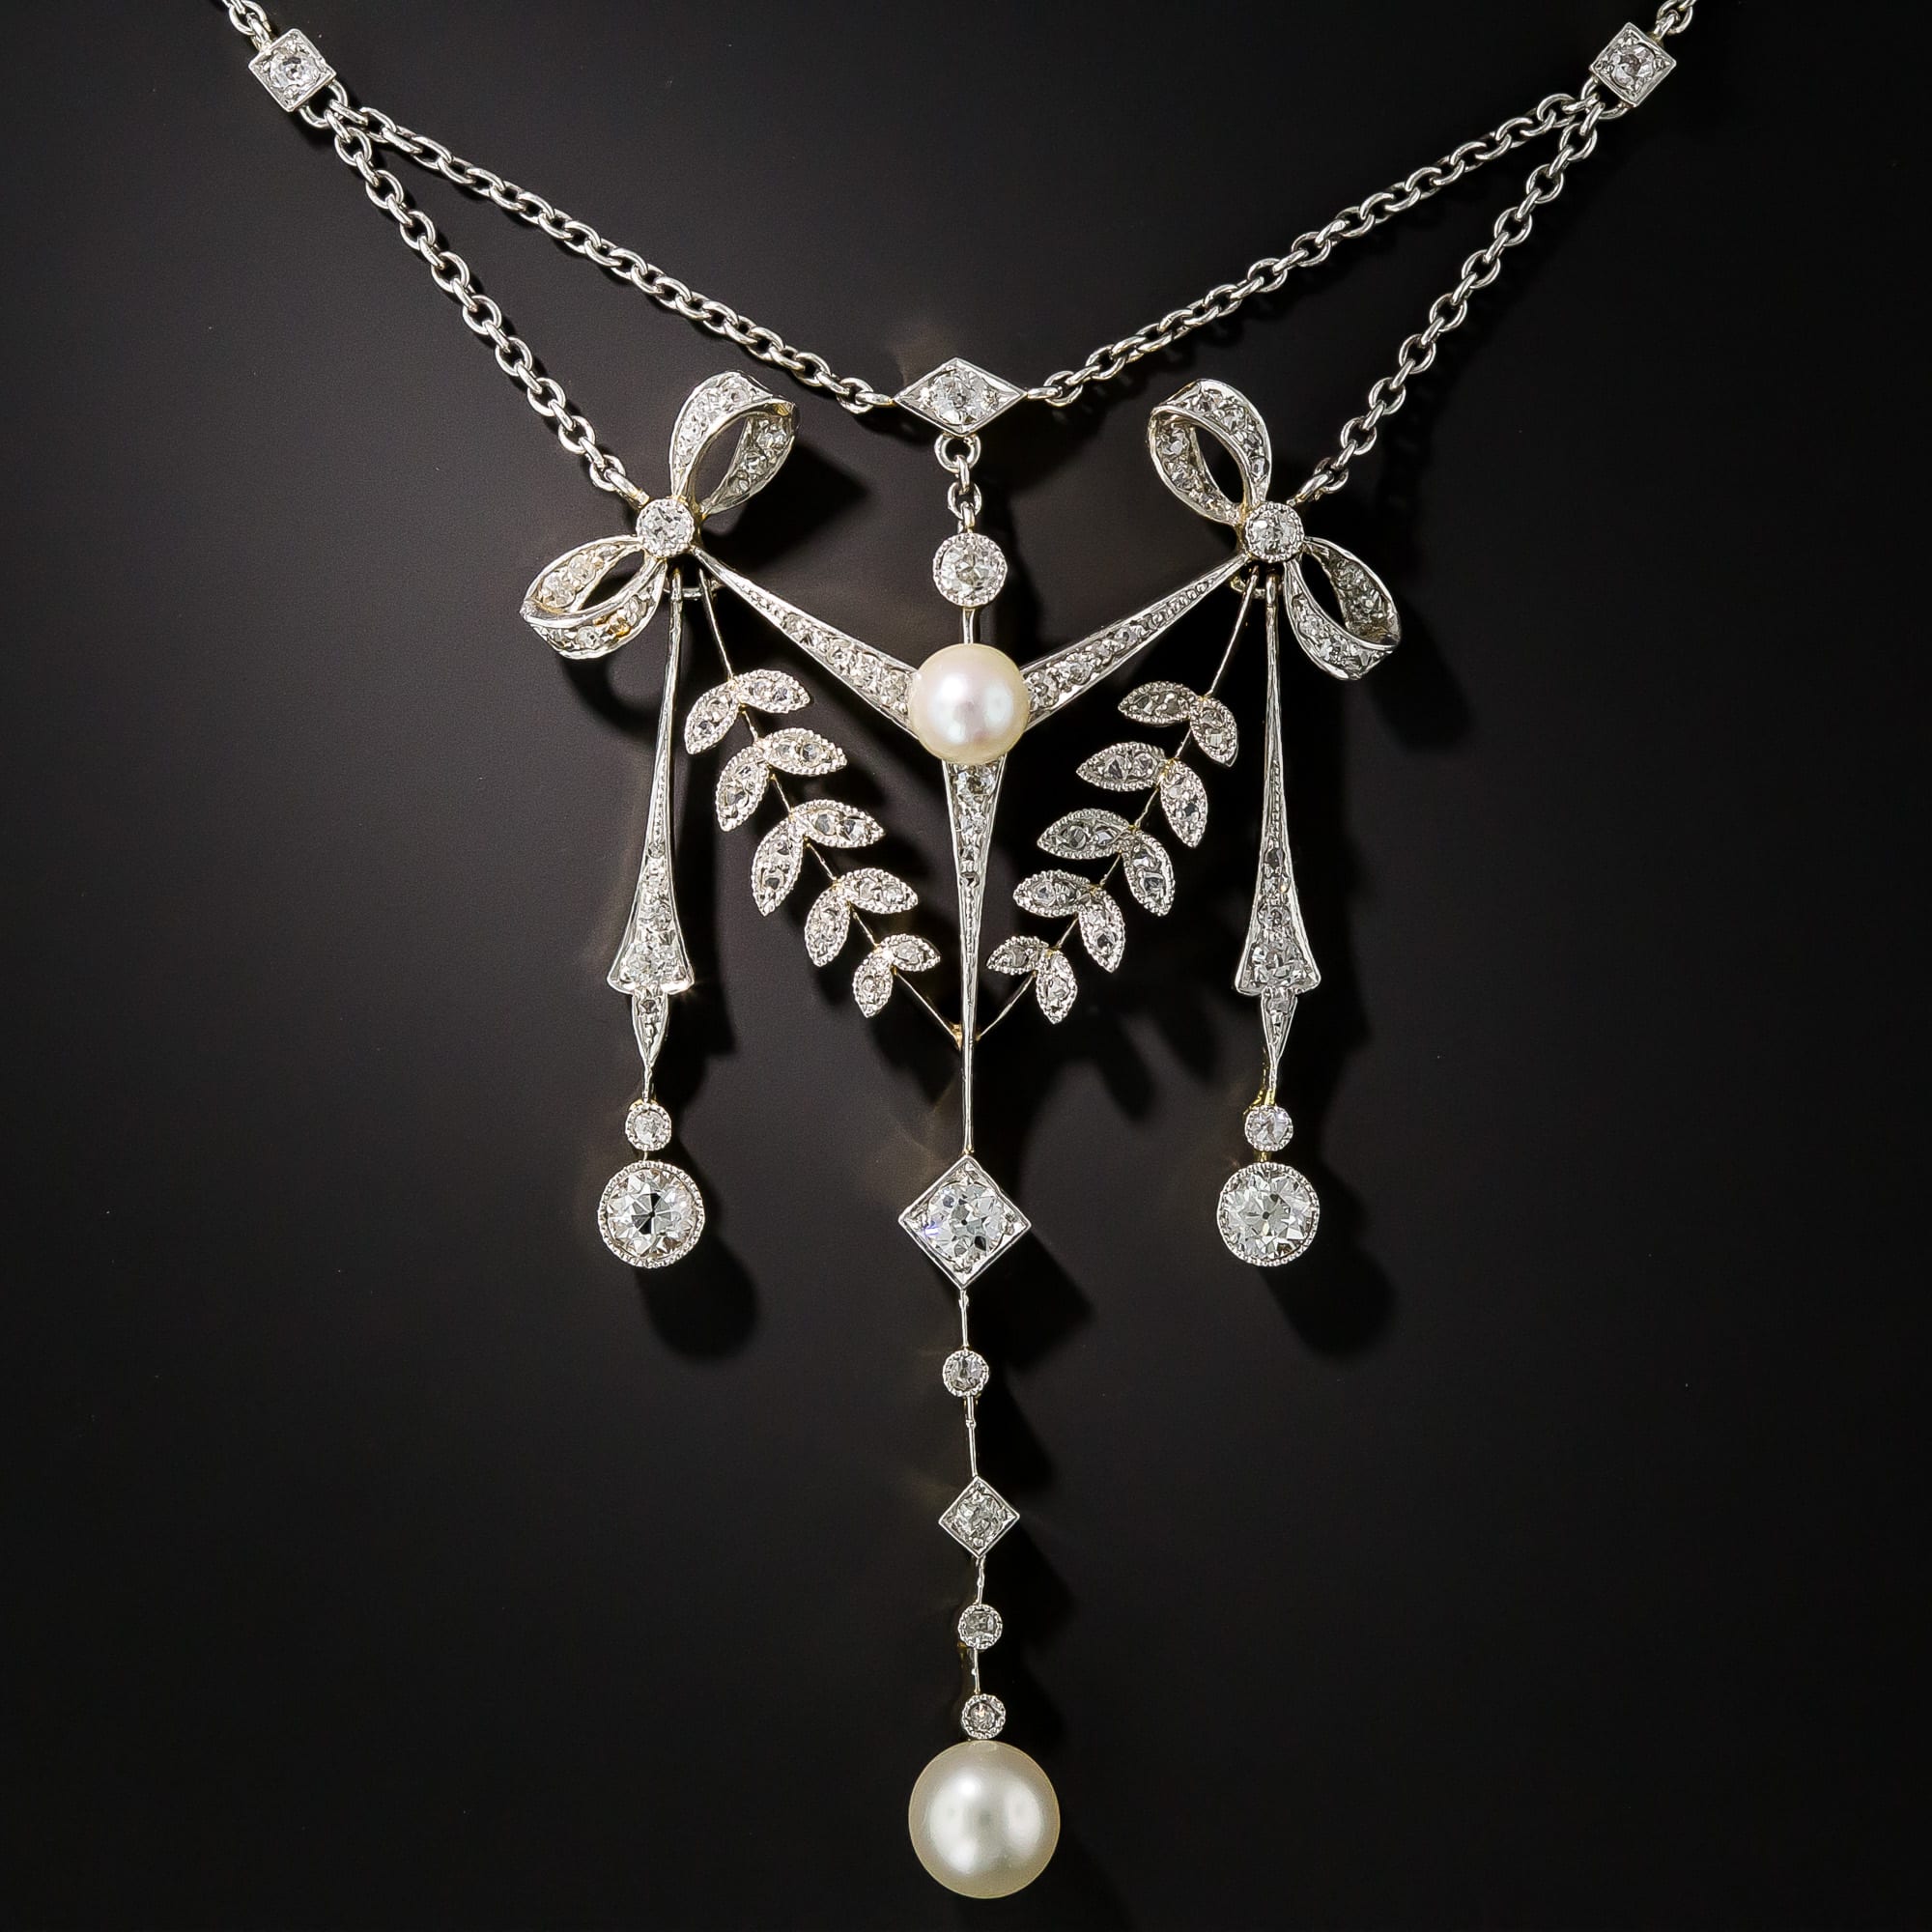 Edwardian Diamond and Pearl Bow, Dart and Foliate Motif Necklace.